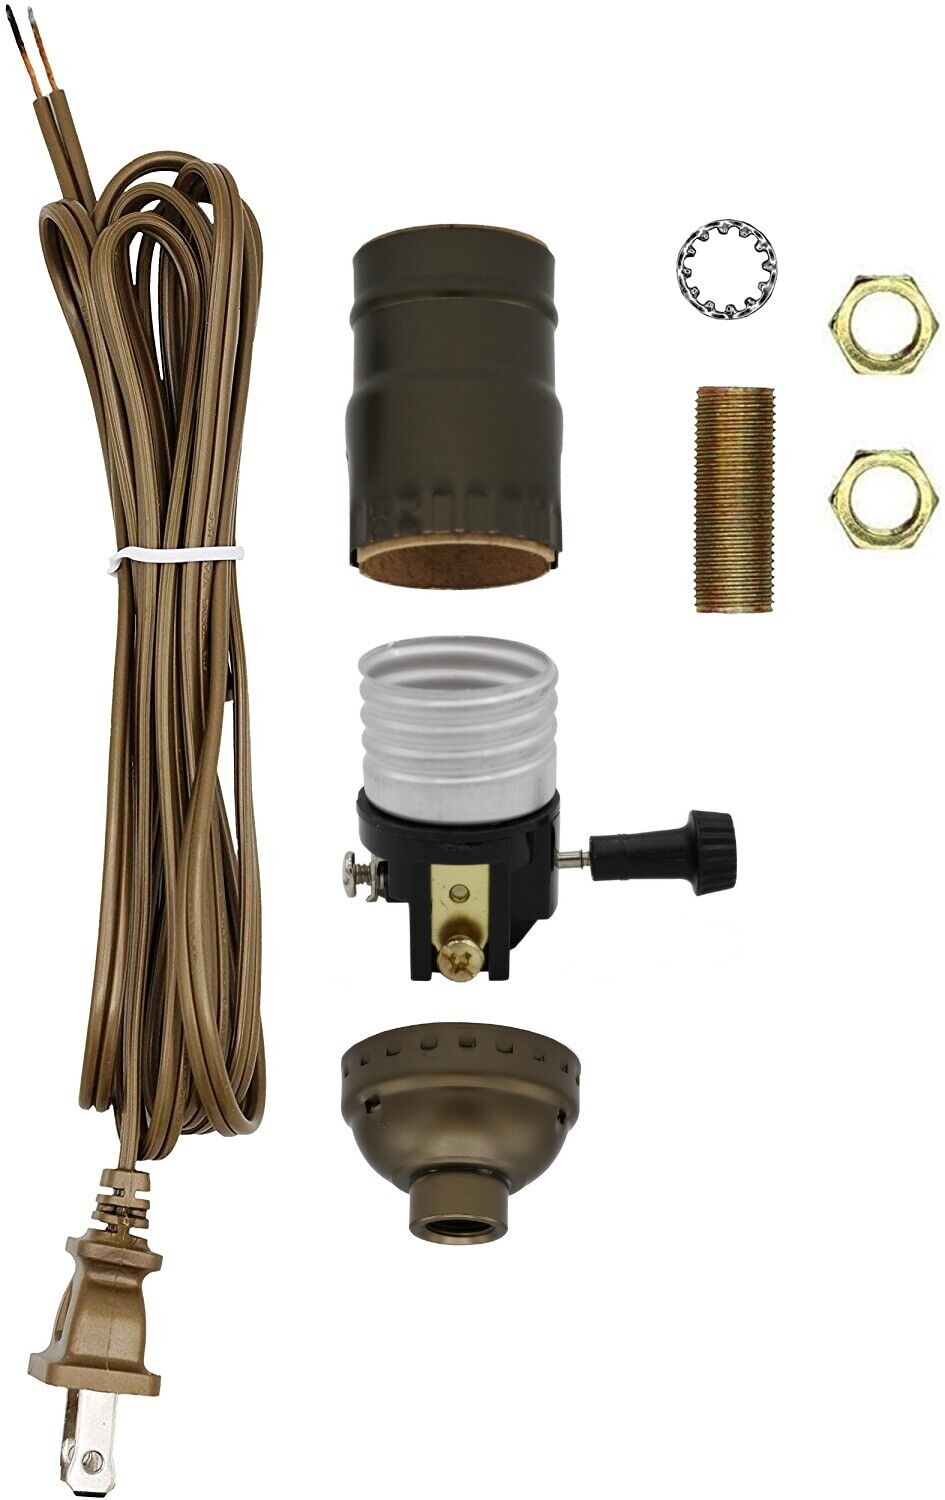 Make a Lamp or Repair Kit - All Essential Hardware, 3 Way Socket - Antique Brass